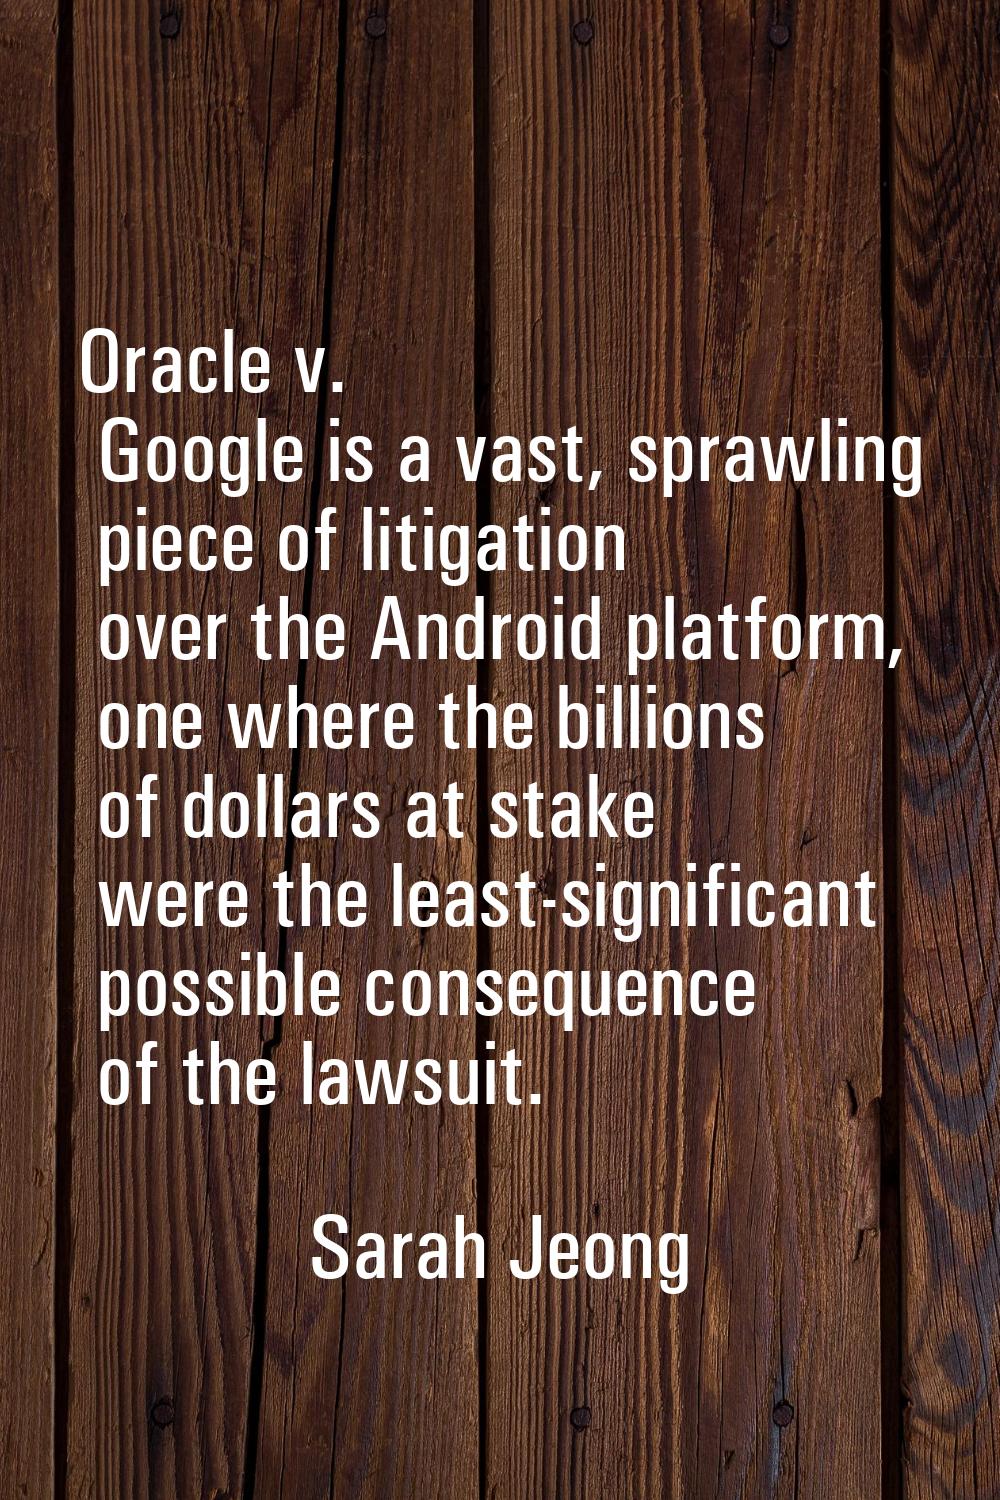 Oracle v. Google is a vast, sprawling piece of litigation over the Android platform, one where the 